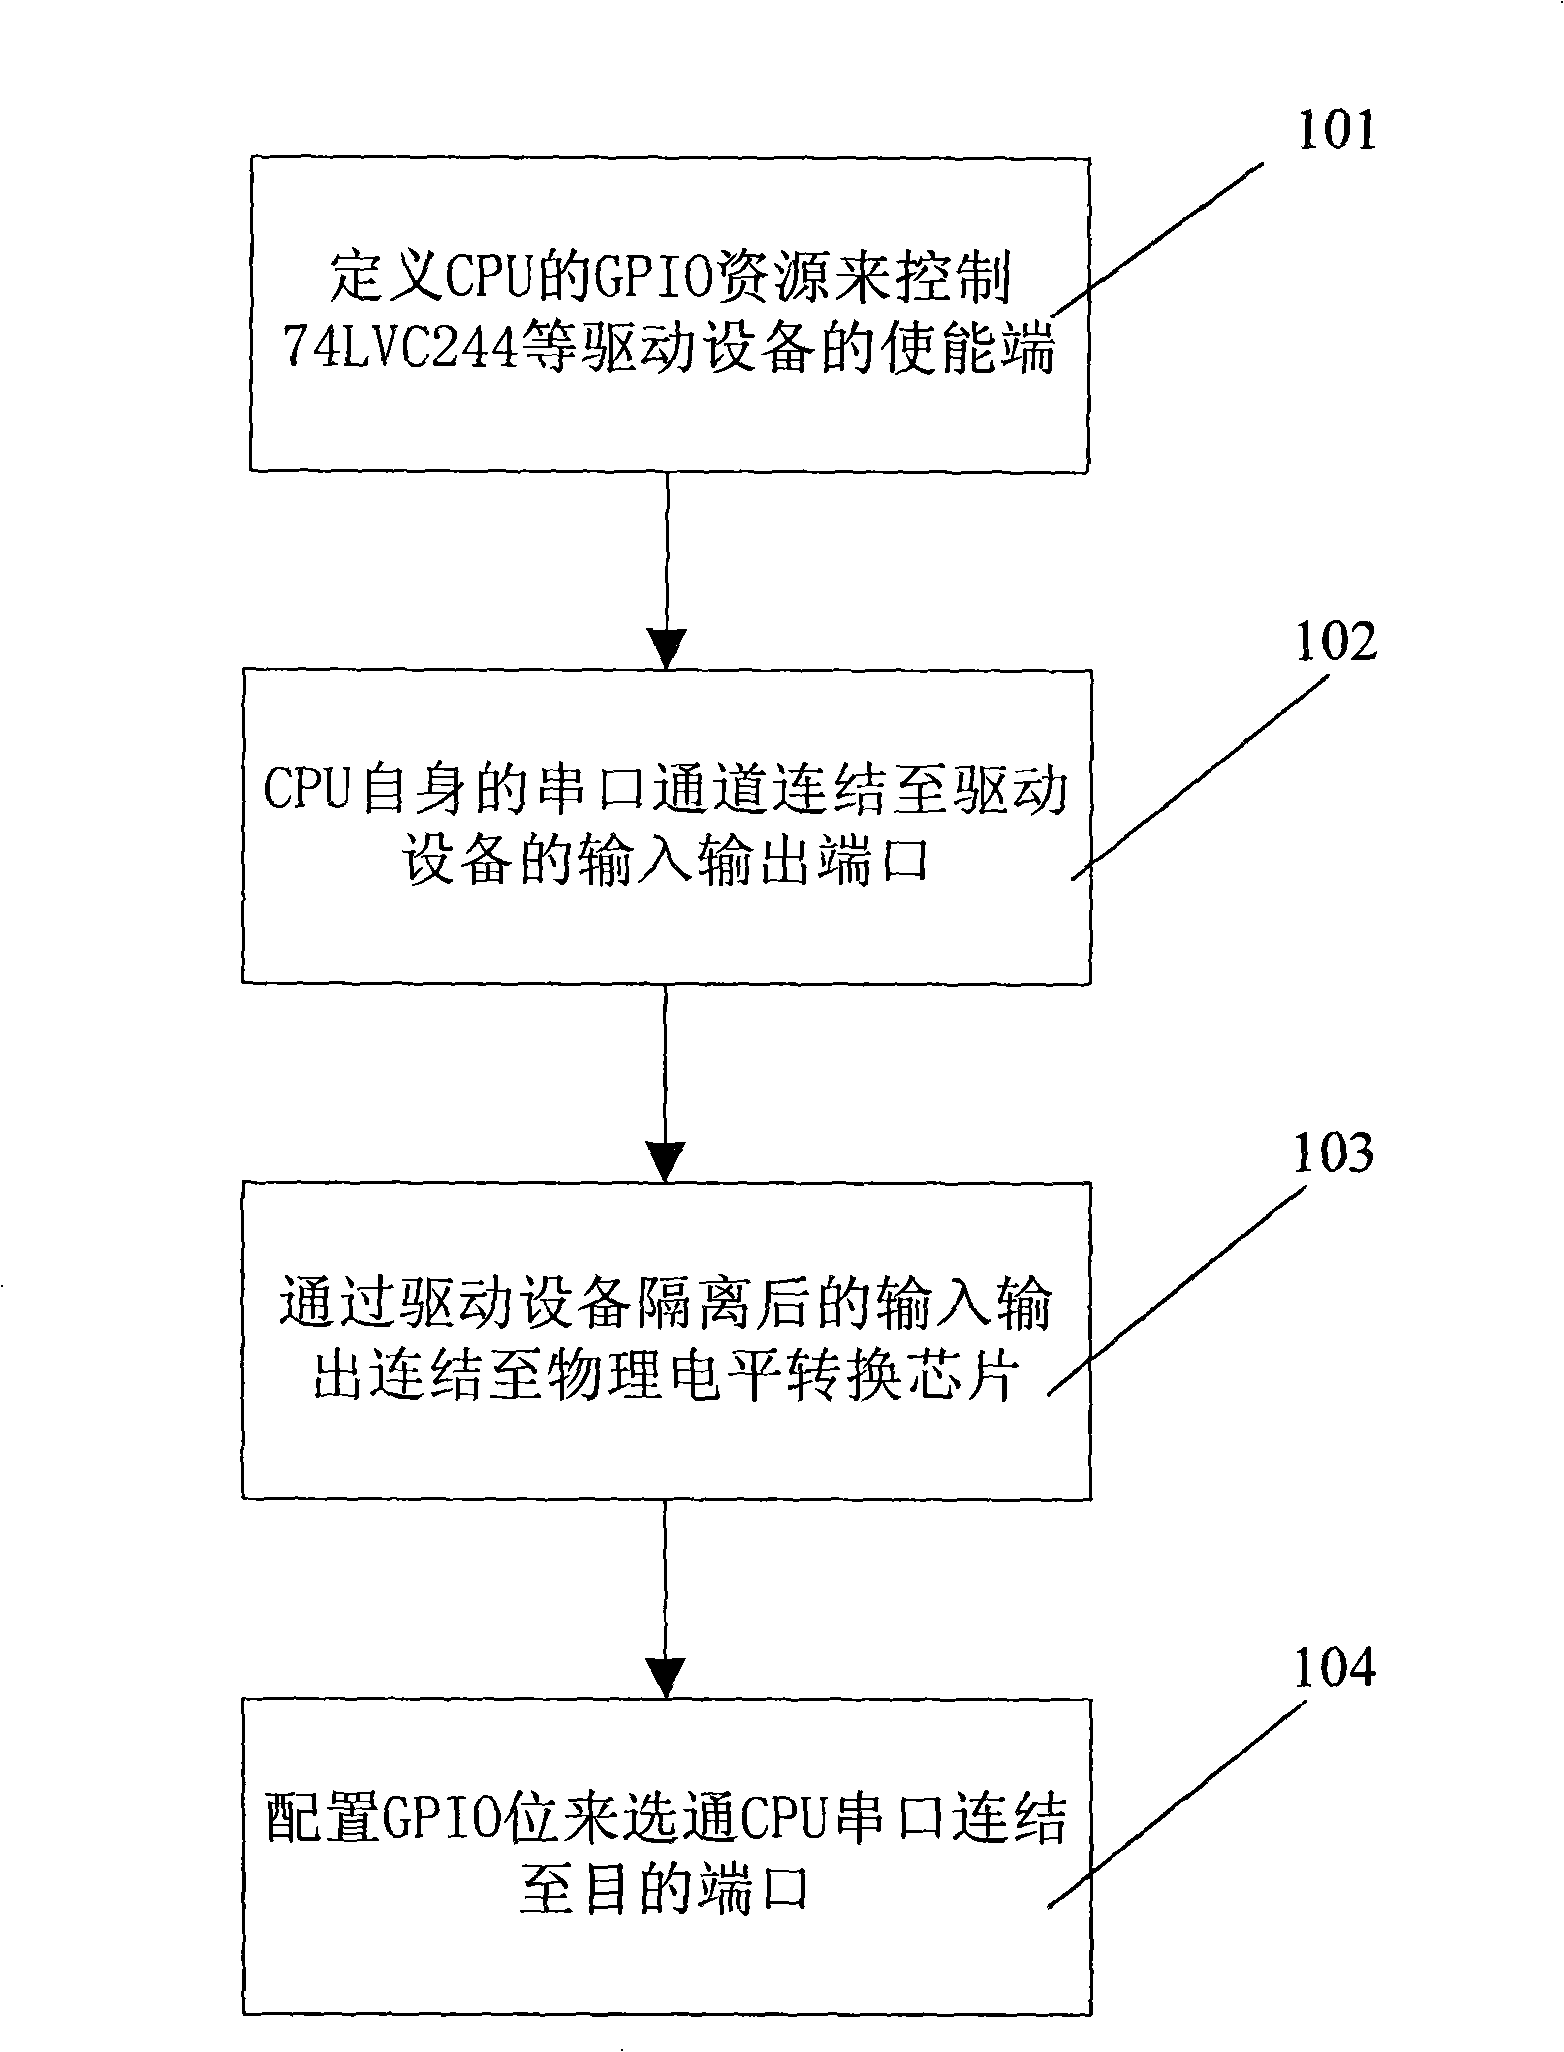 Method and apparatus for expanding multiple serial ports of terminal